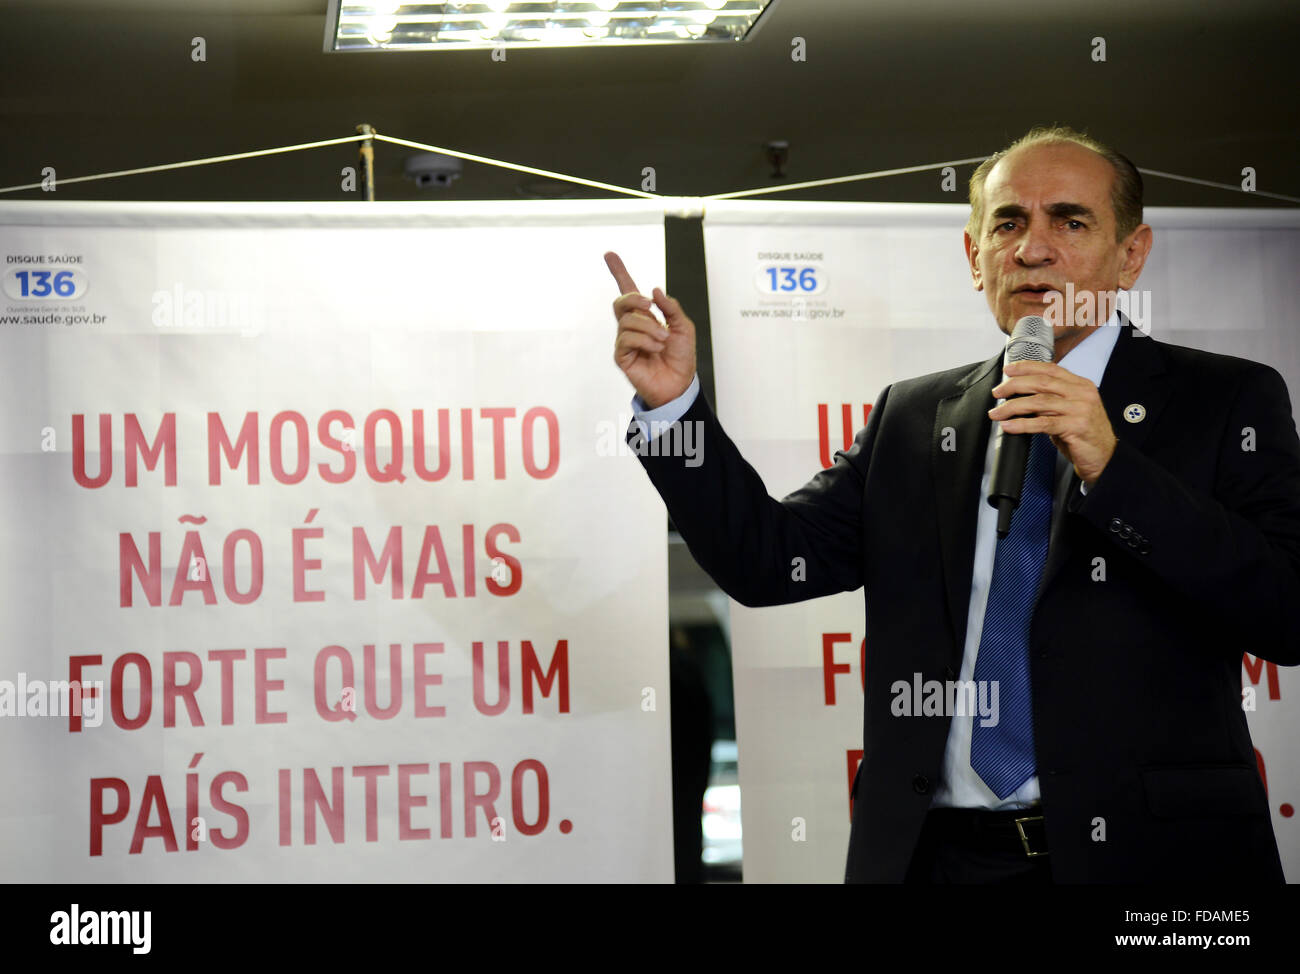 Brasilia, Brazil. 29th Jan, 2016. Brazil Health Minister Marcelo Castro unveils a public service campaign to combat the Zika virus outbreak during a news conference at the Ministry of Health Annex January 29, 2016 in Brasilia, Brazil. Global health officials have called the spread of the virus explosive. Credit:  Planetpix/Alamy Live News Stock Photo